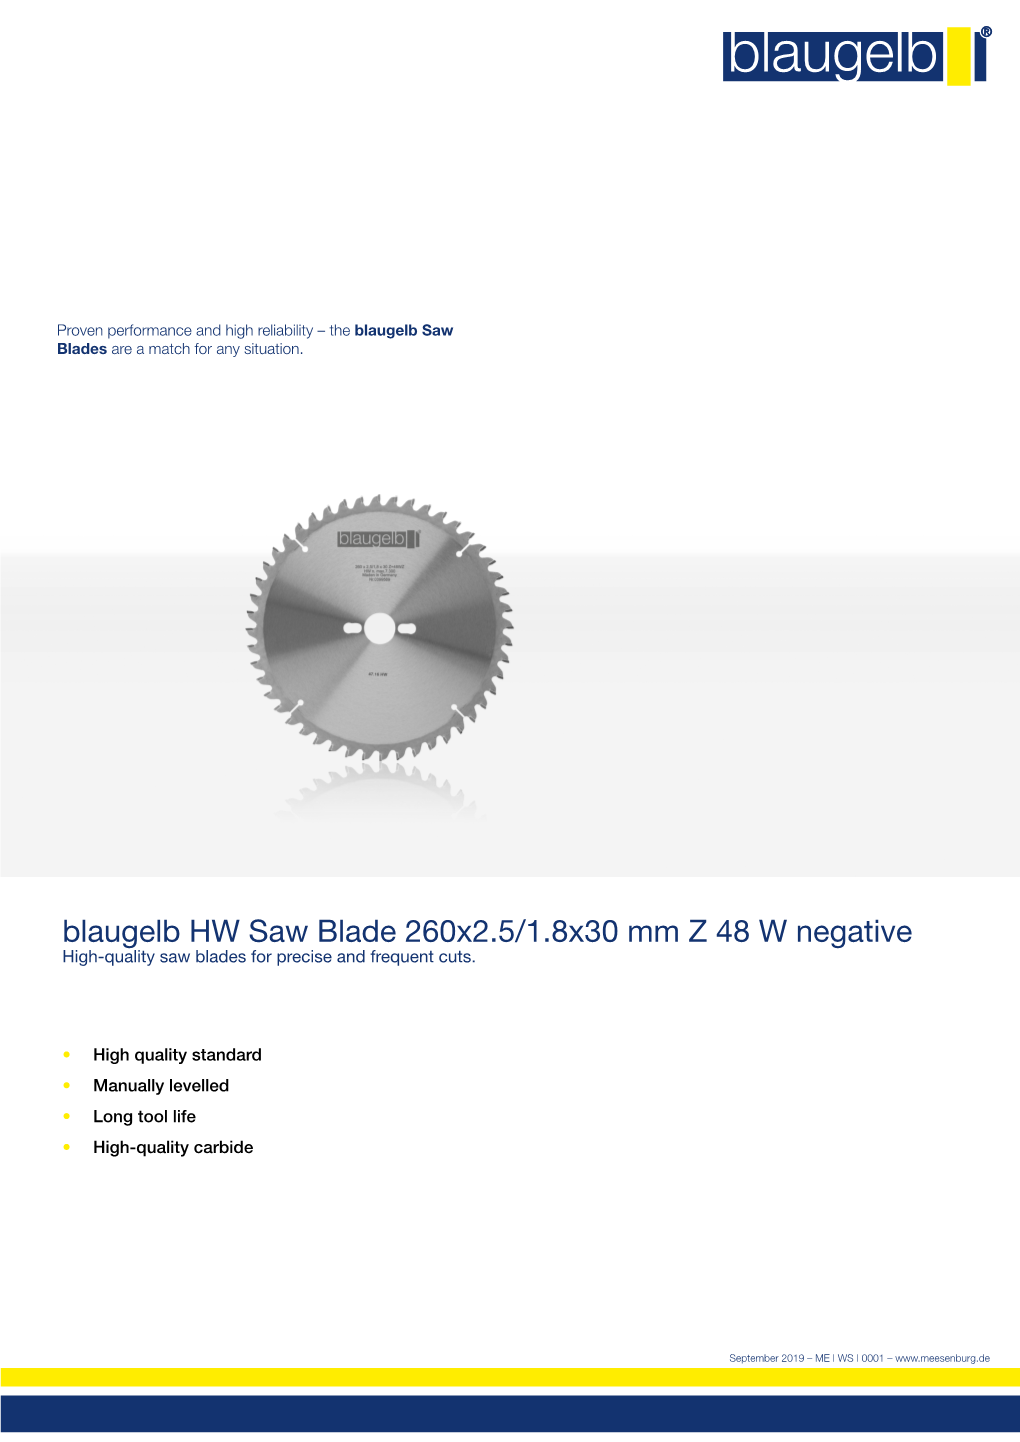 Blaugelb HW Saw Blade 260X2.5/1.8X30 Mm Z 48 W Negative High-Quality Saw Blades for Precise and Frequent Cuts